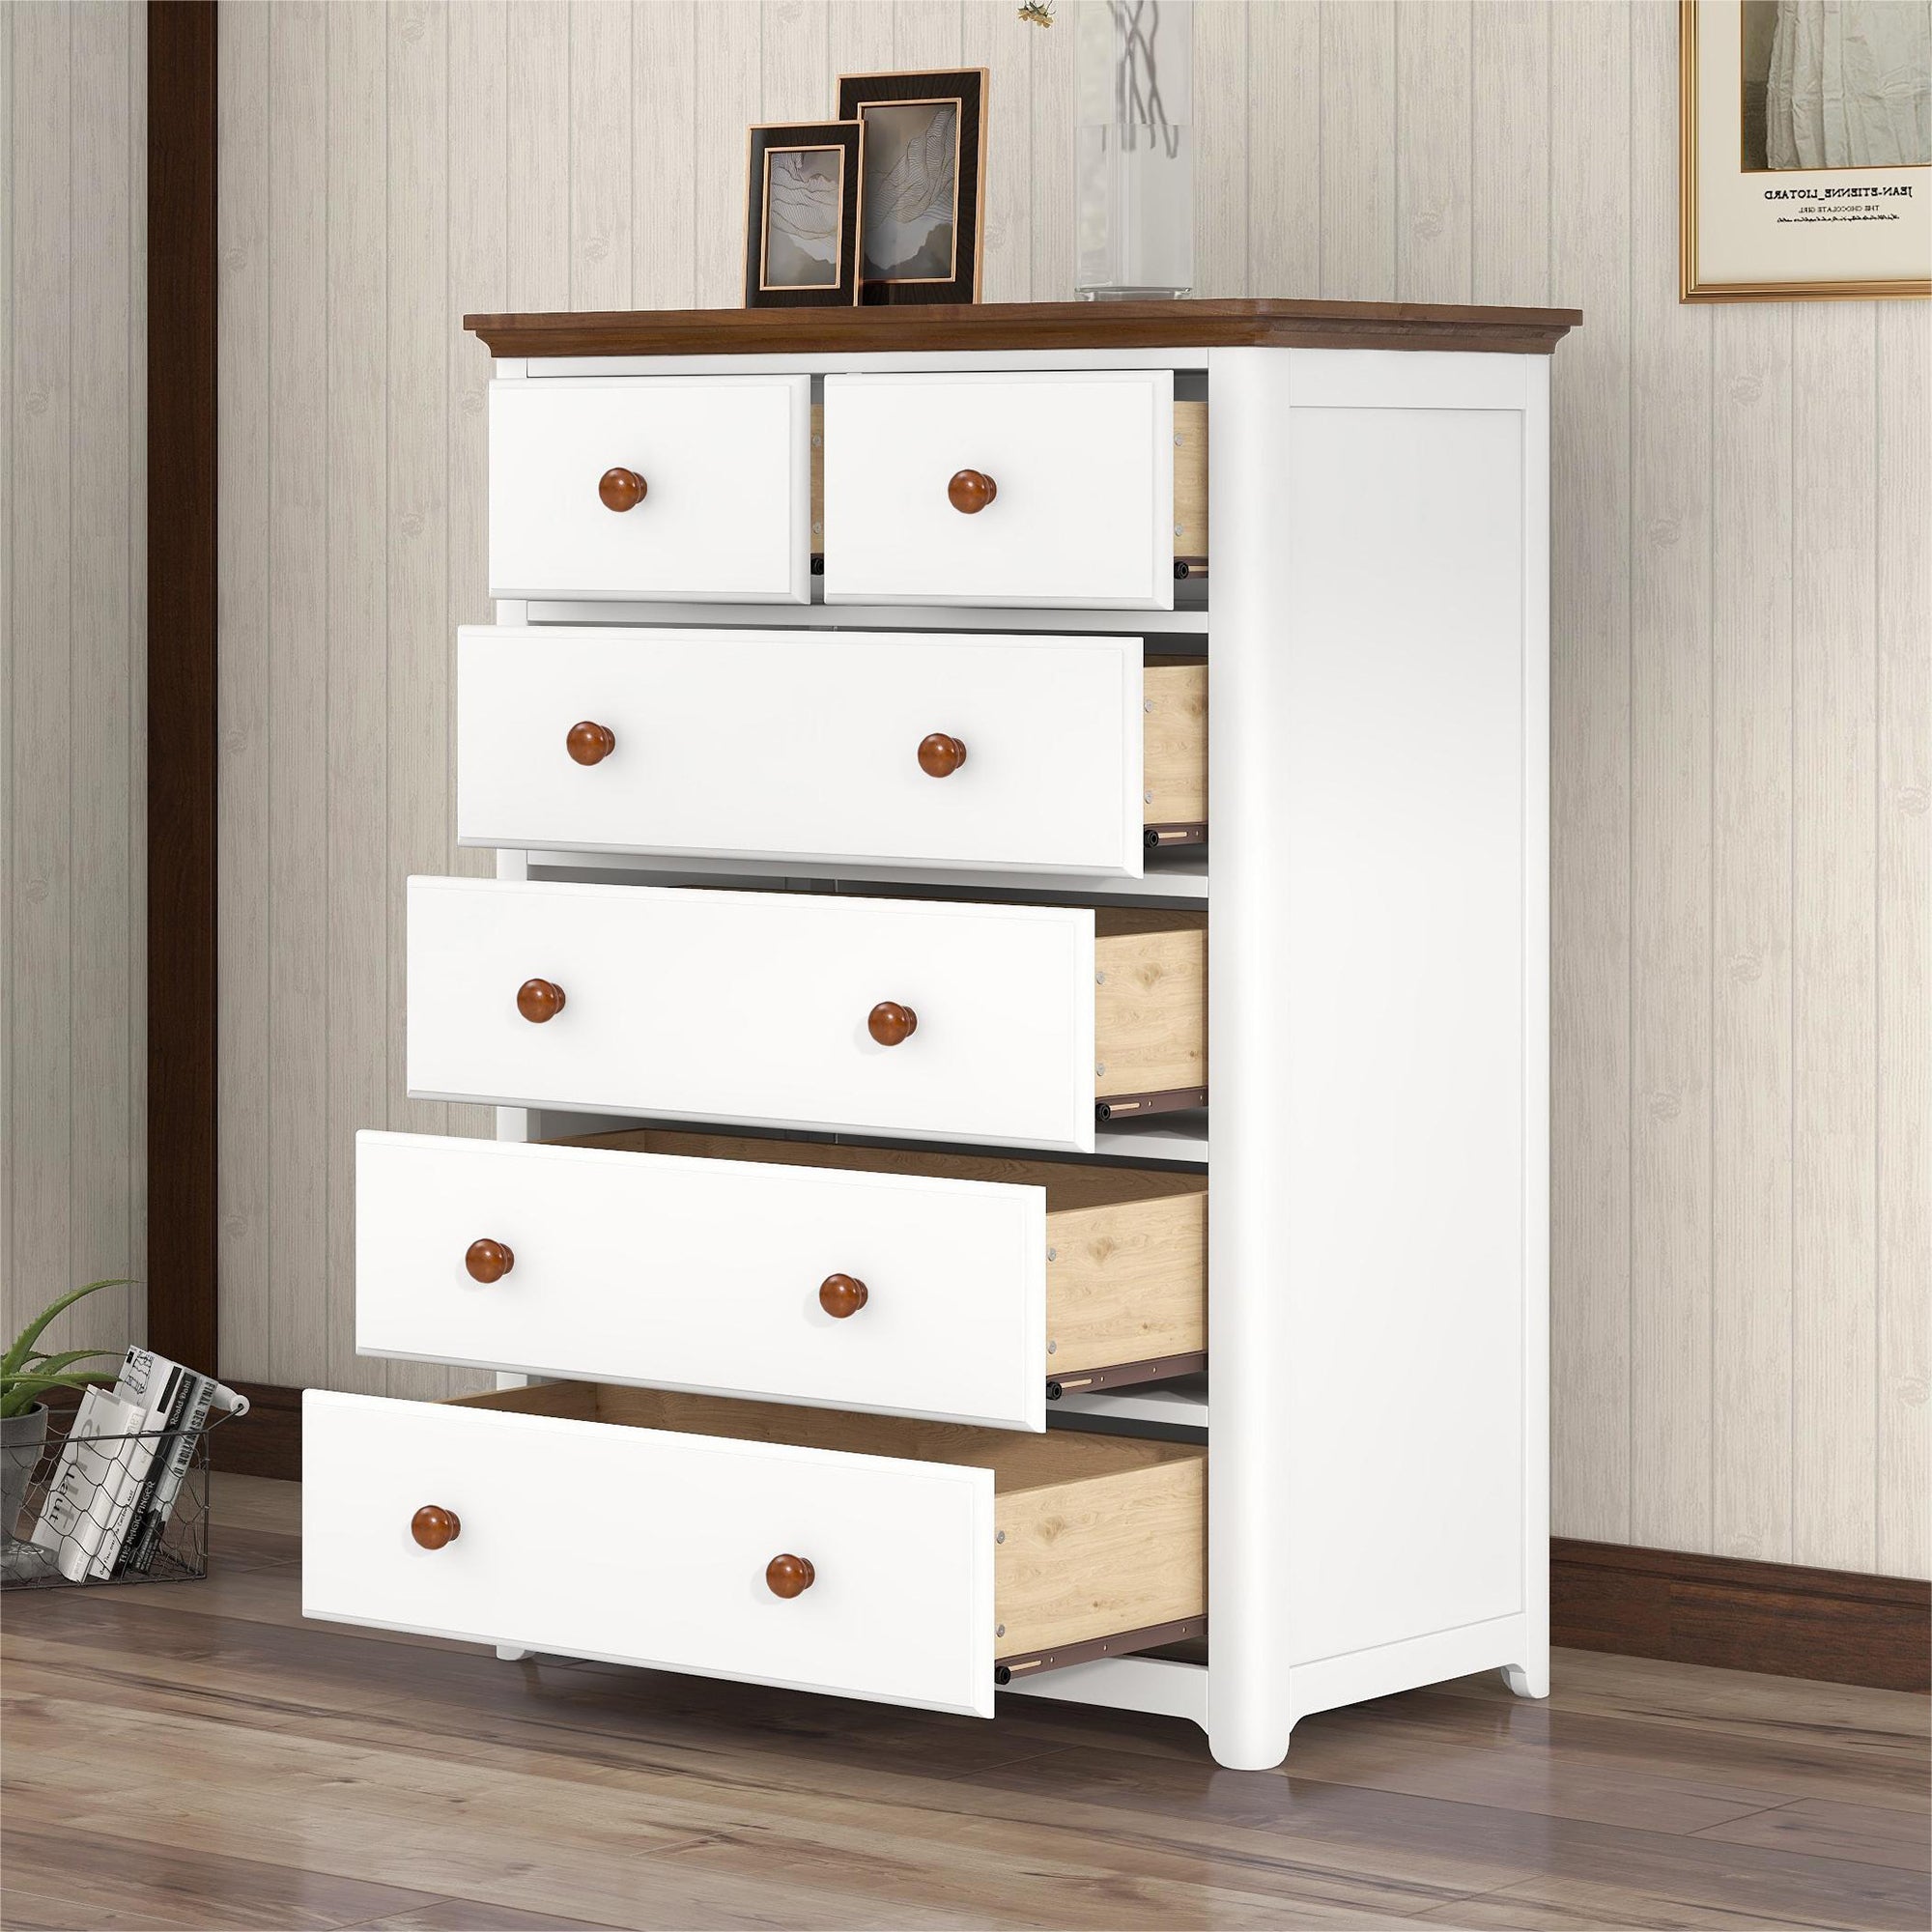 Rustic Wooden Chest with 6 Drawers,Storage Cabinet for Bedroom,White+Walnut